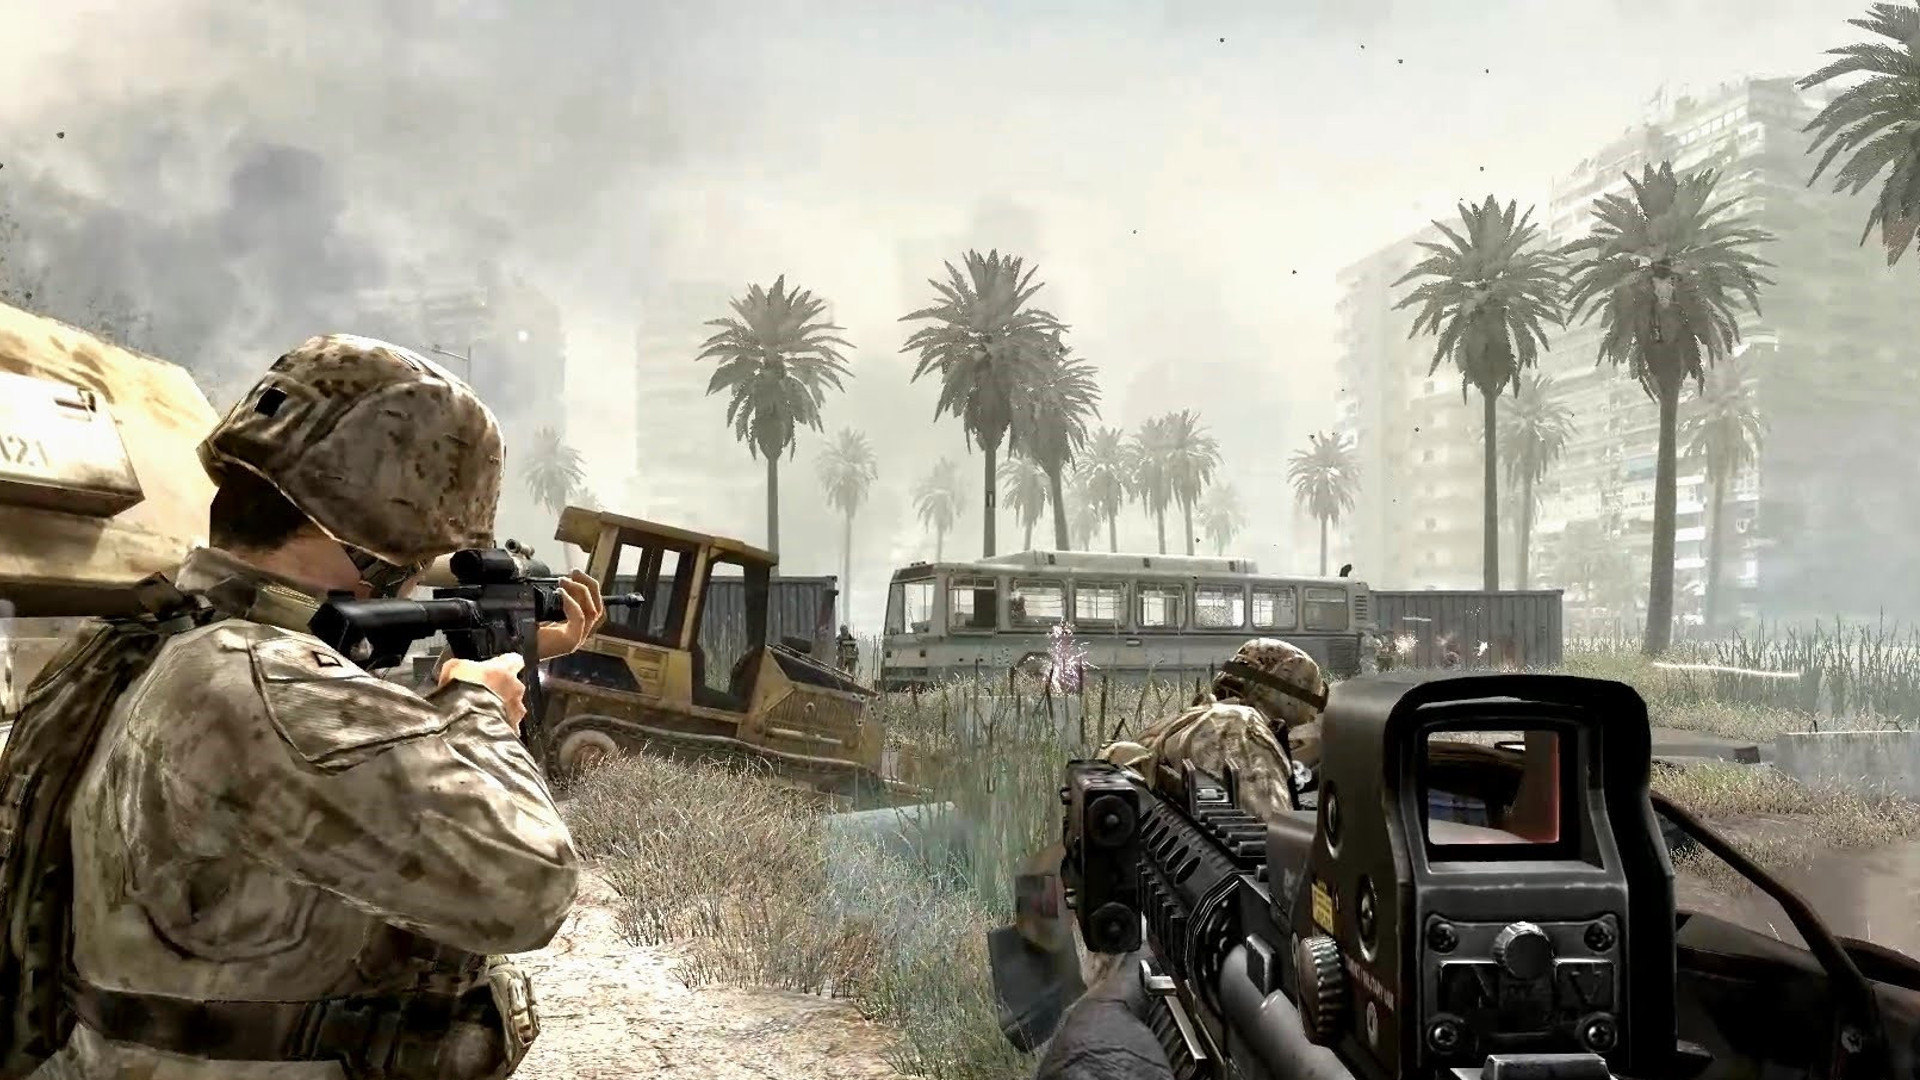 Call of Duty 4 screenshot of a solider walking through a dessert area with a city